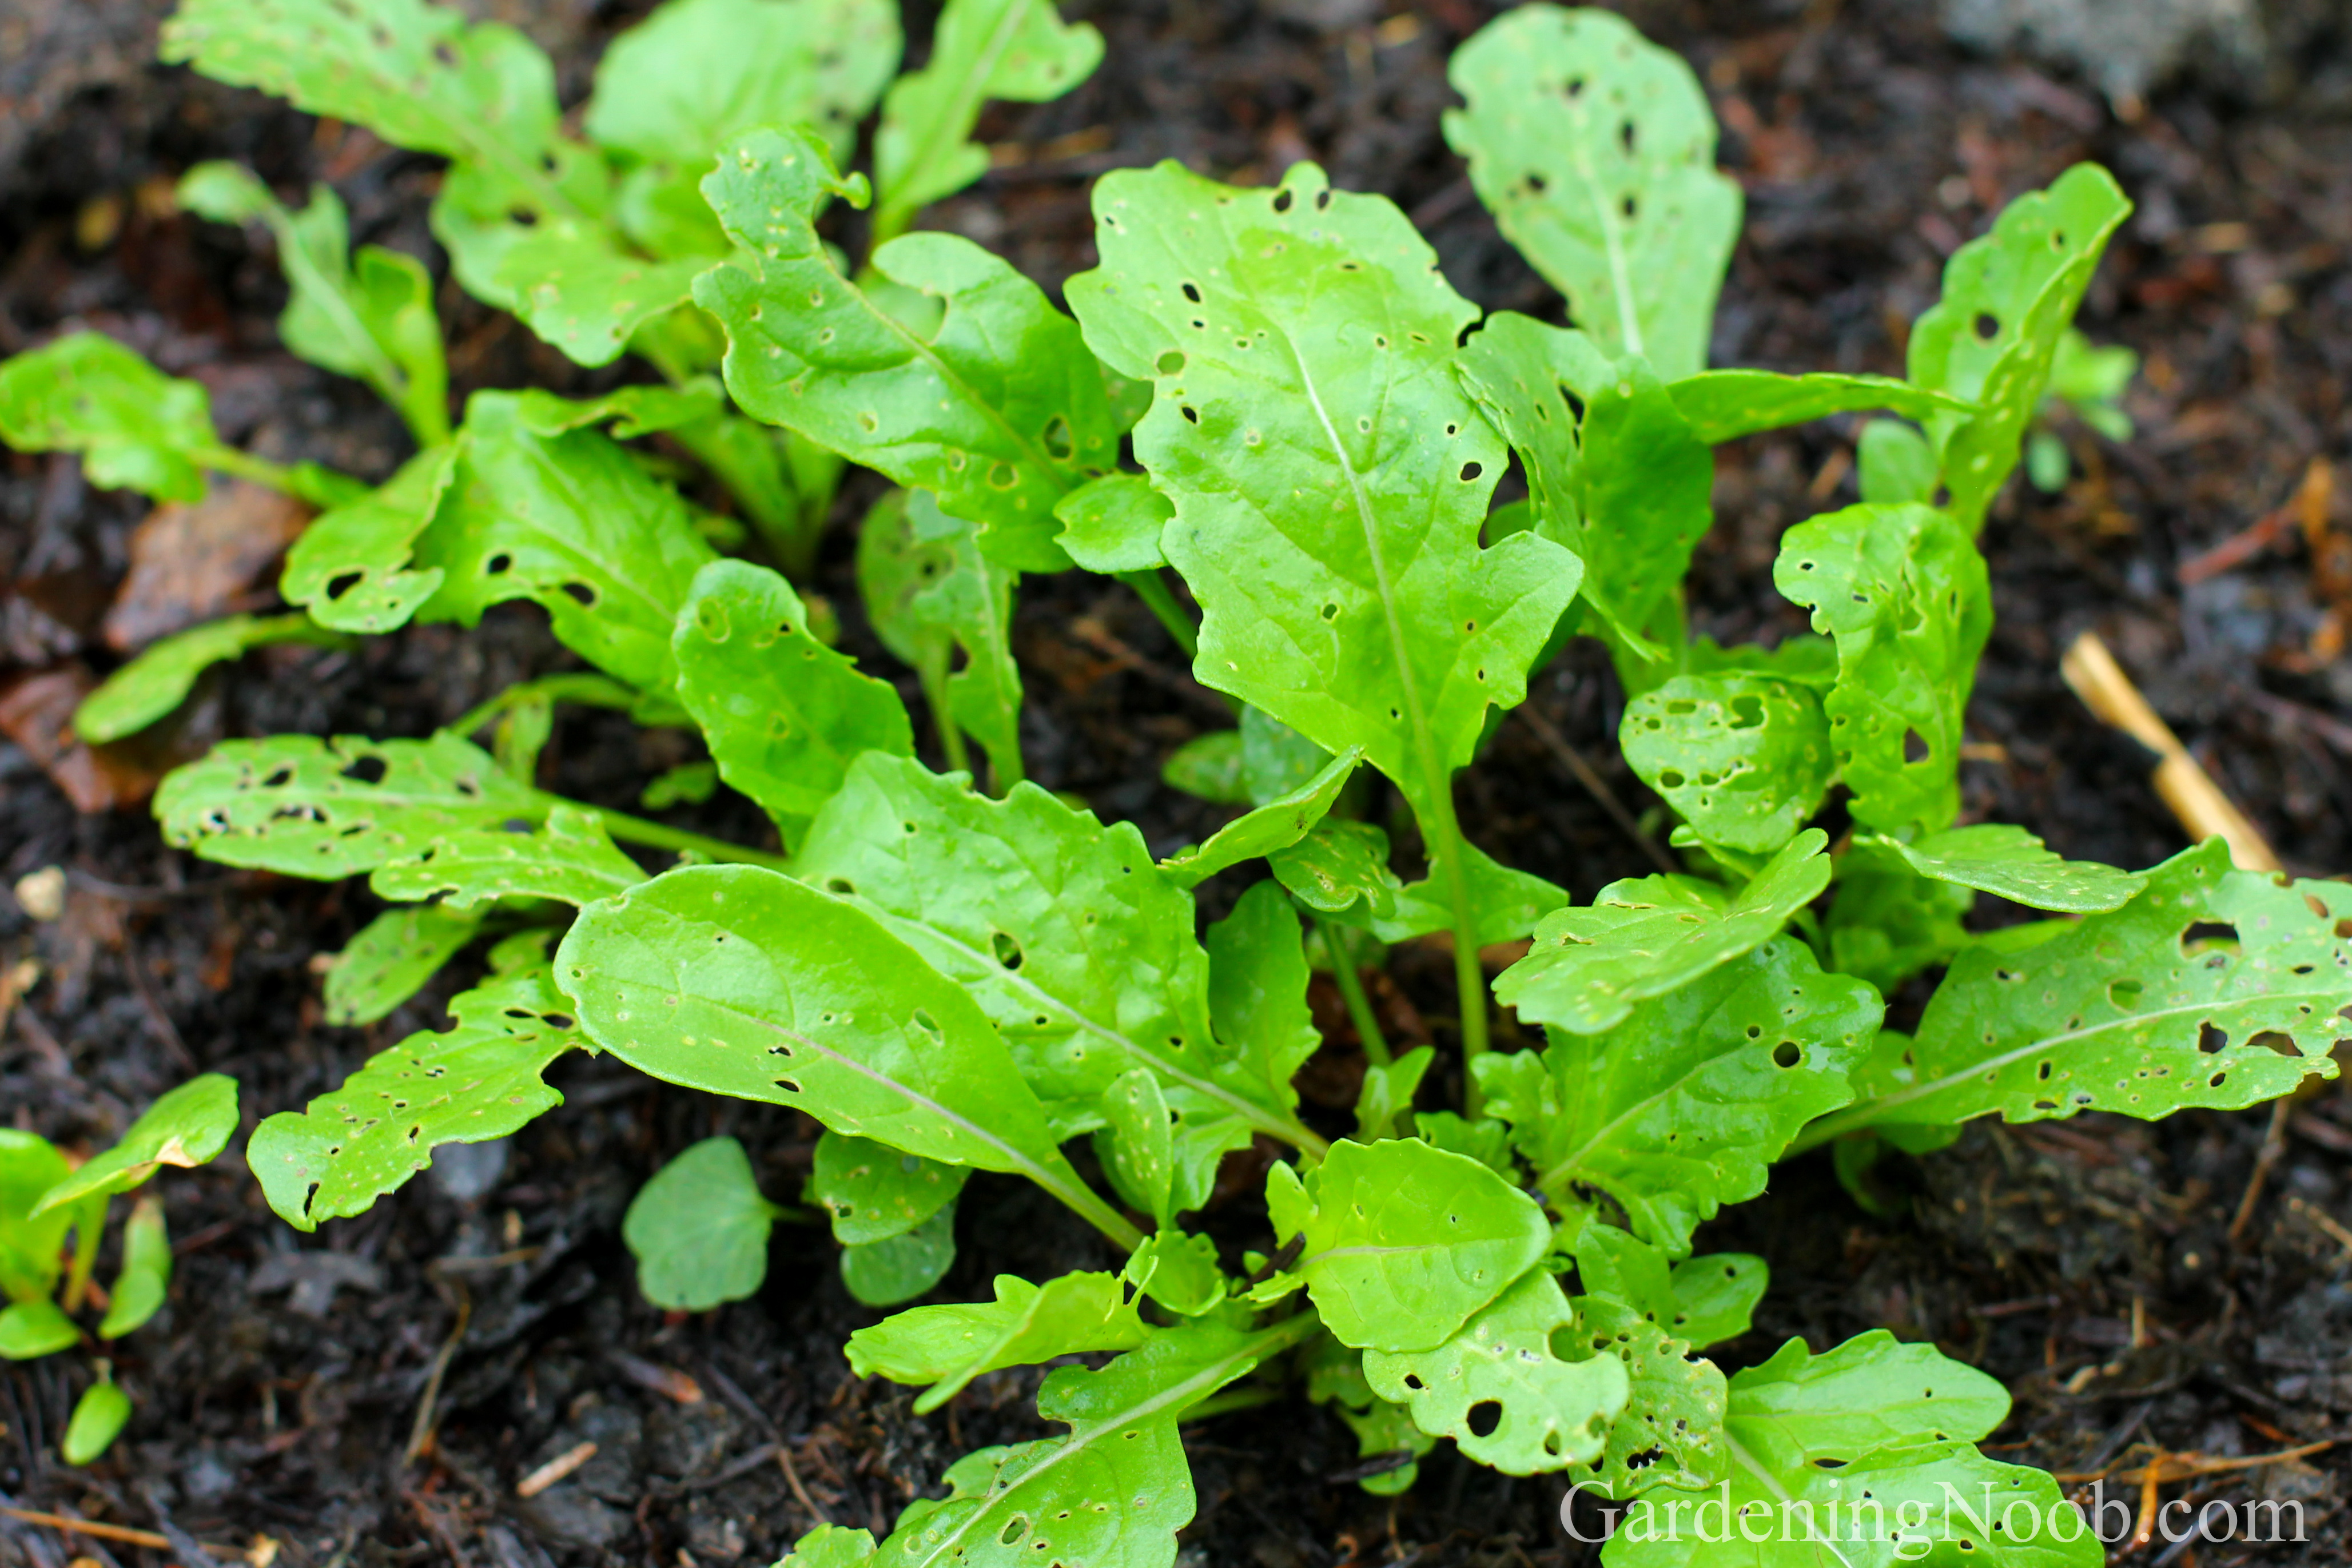 Discover when would be the best time to plant arugula...